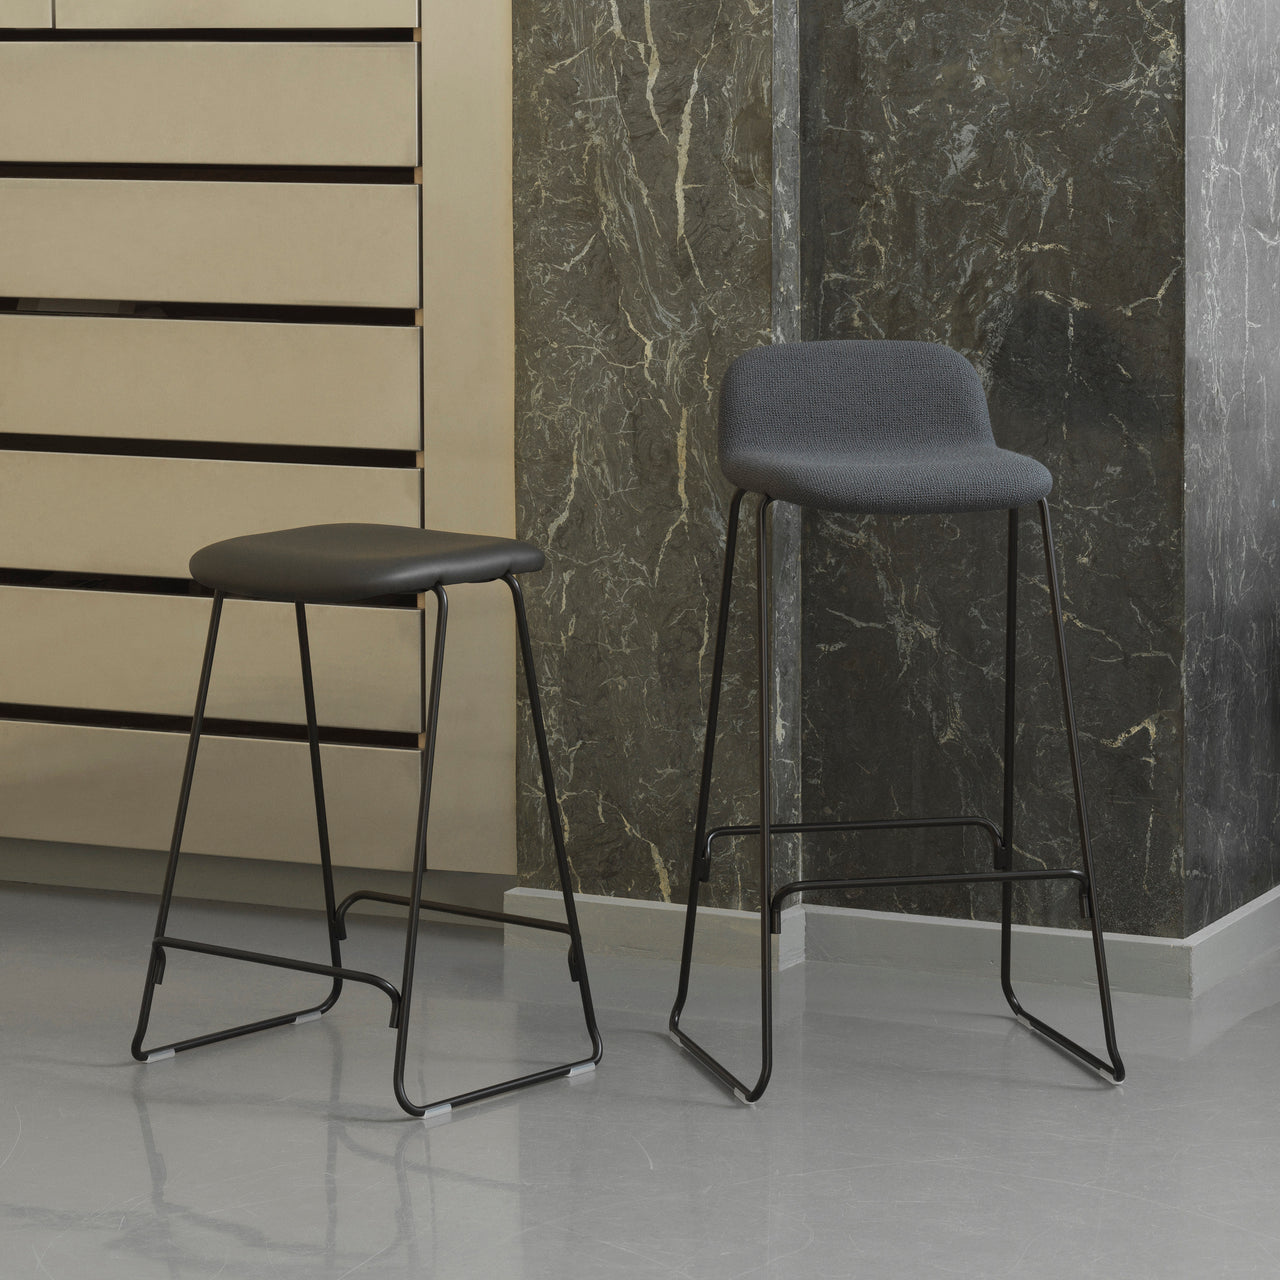 Just Bar + Counter Stool with Back: Full Upholstered